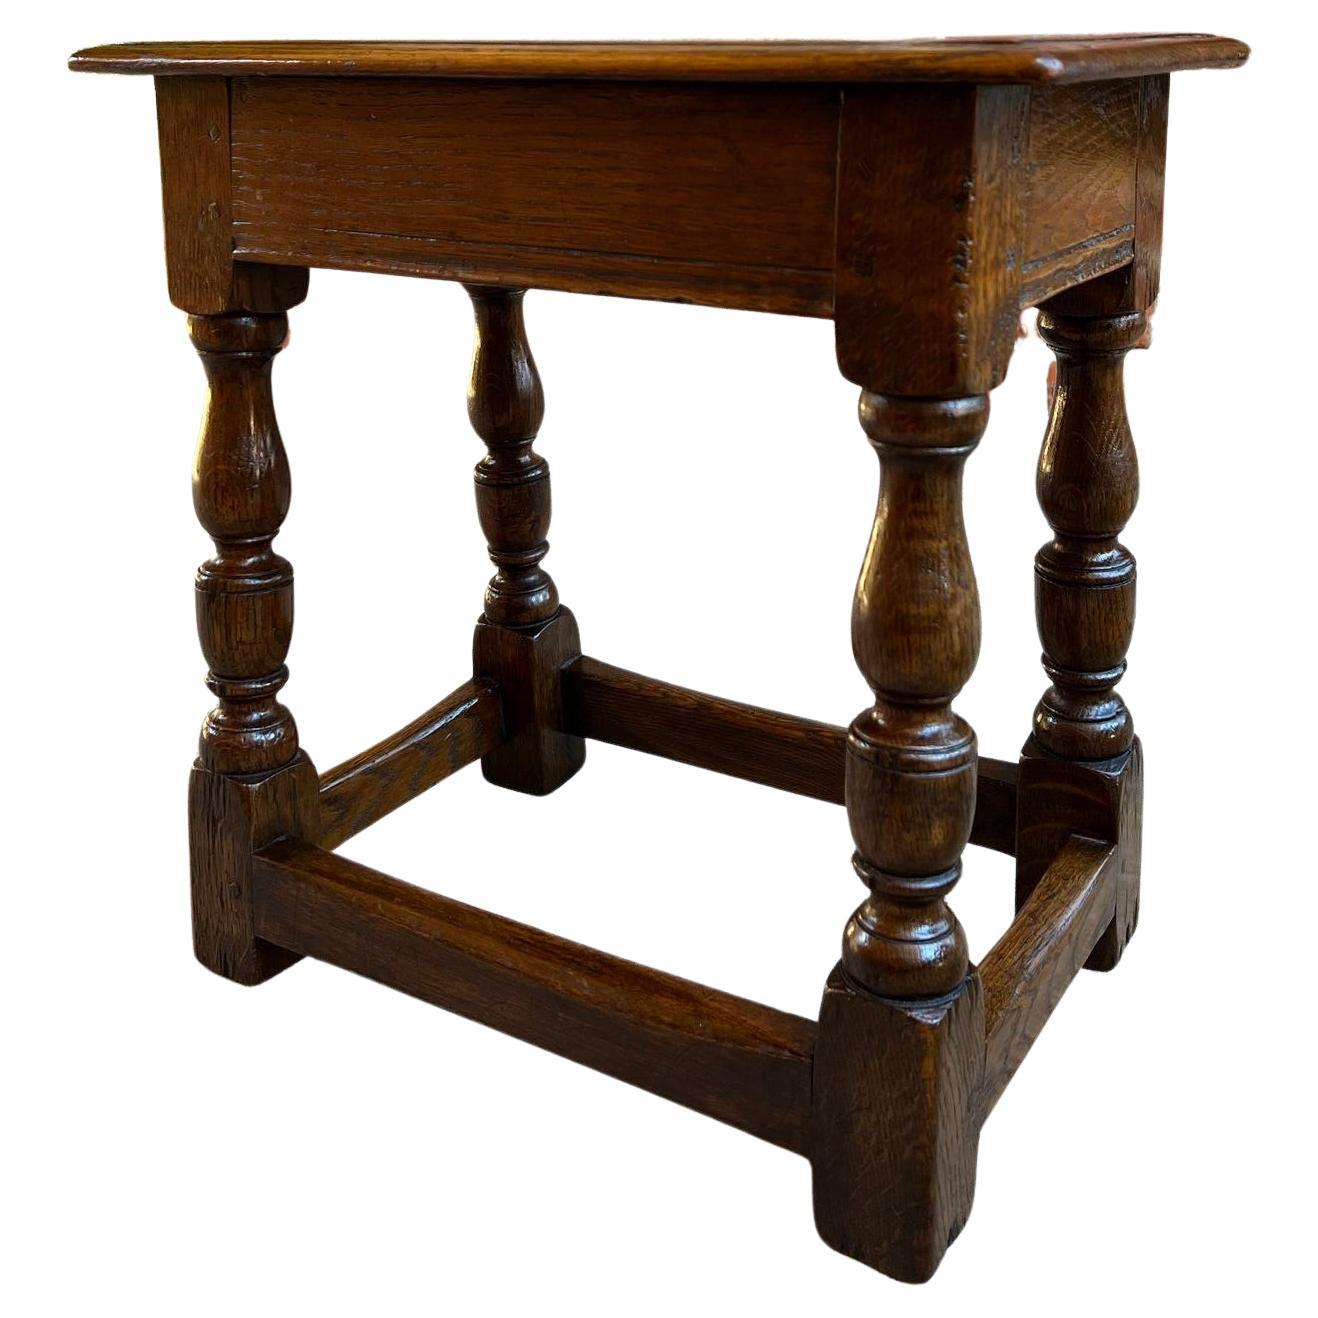 19th century English Oak Joint Stool Pegged Bench Display Stand For Sale